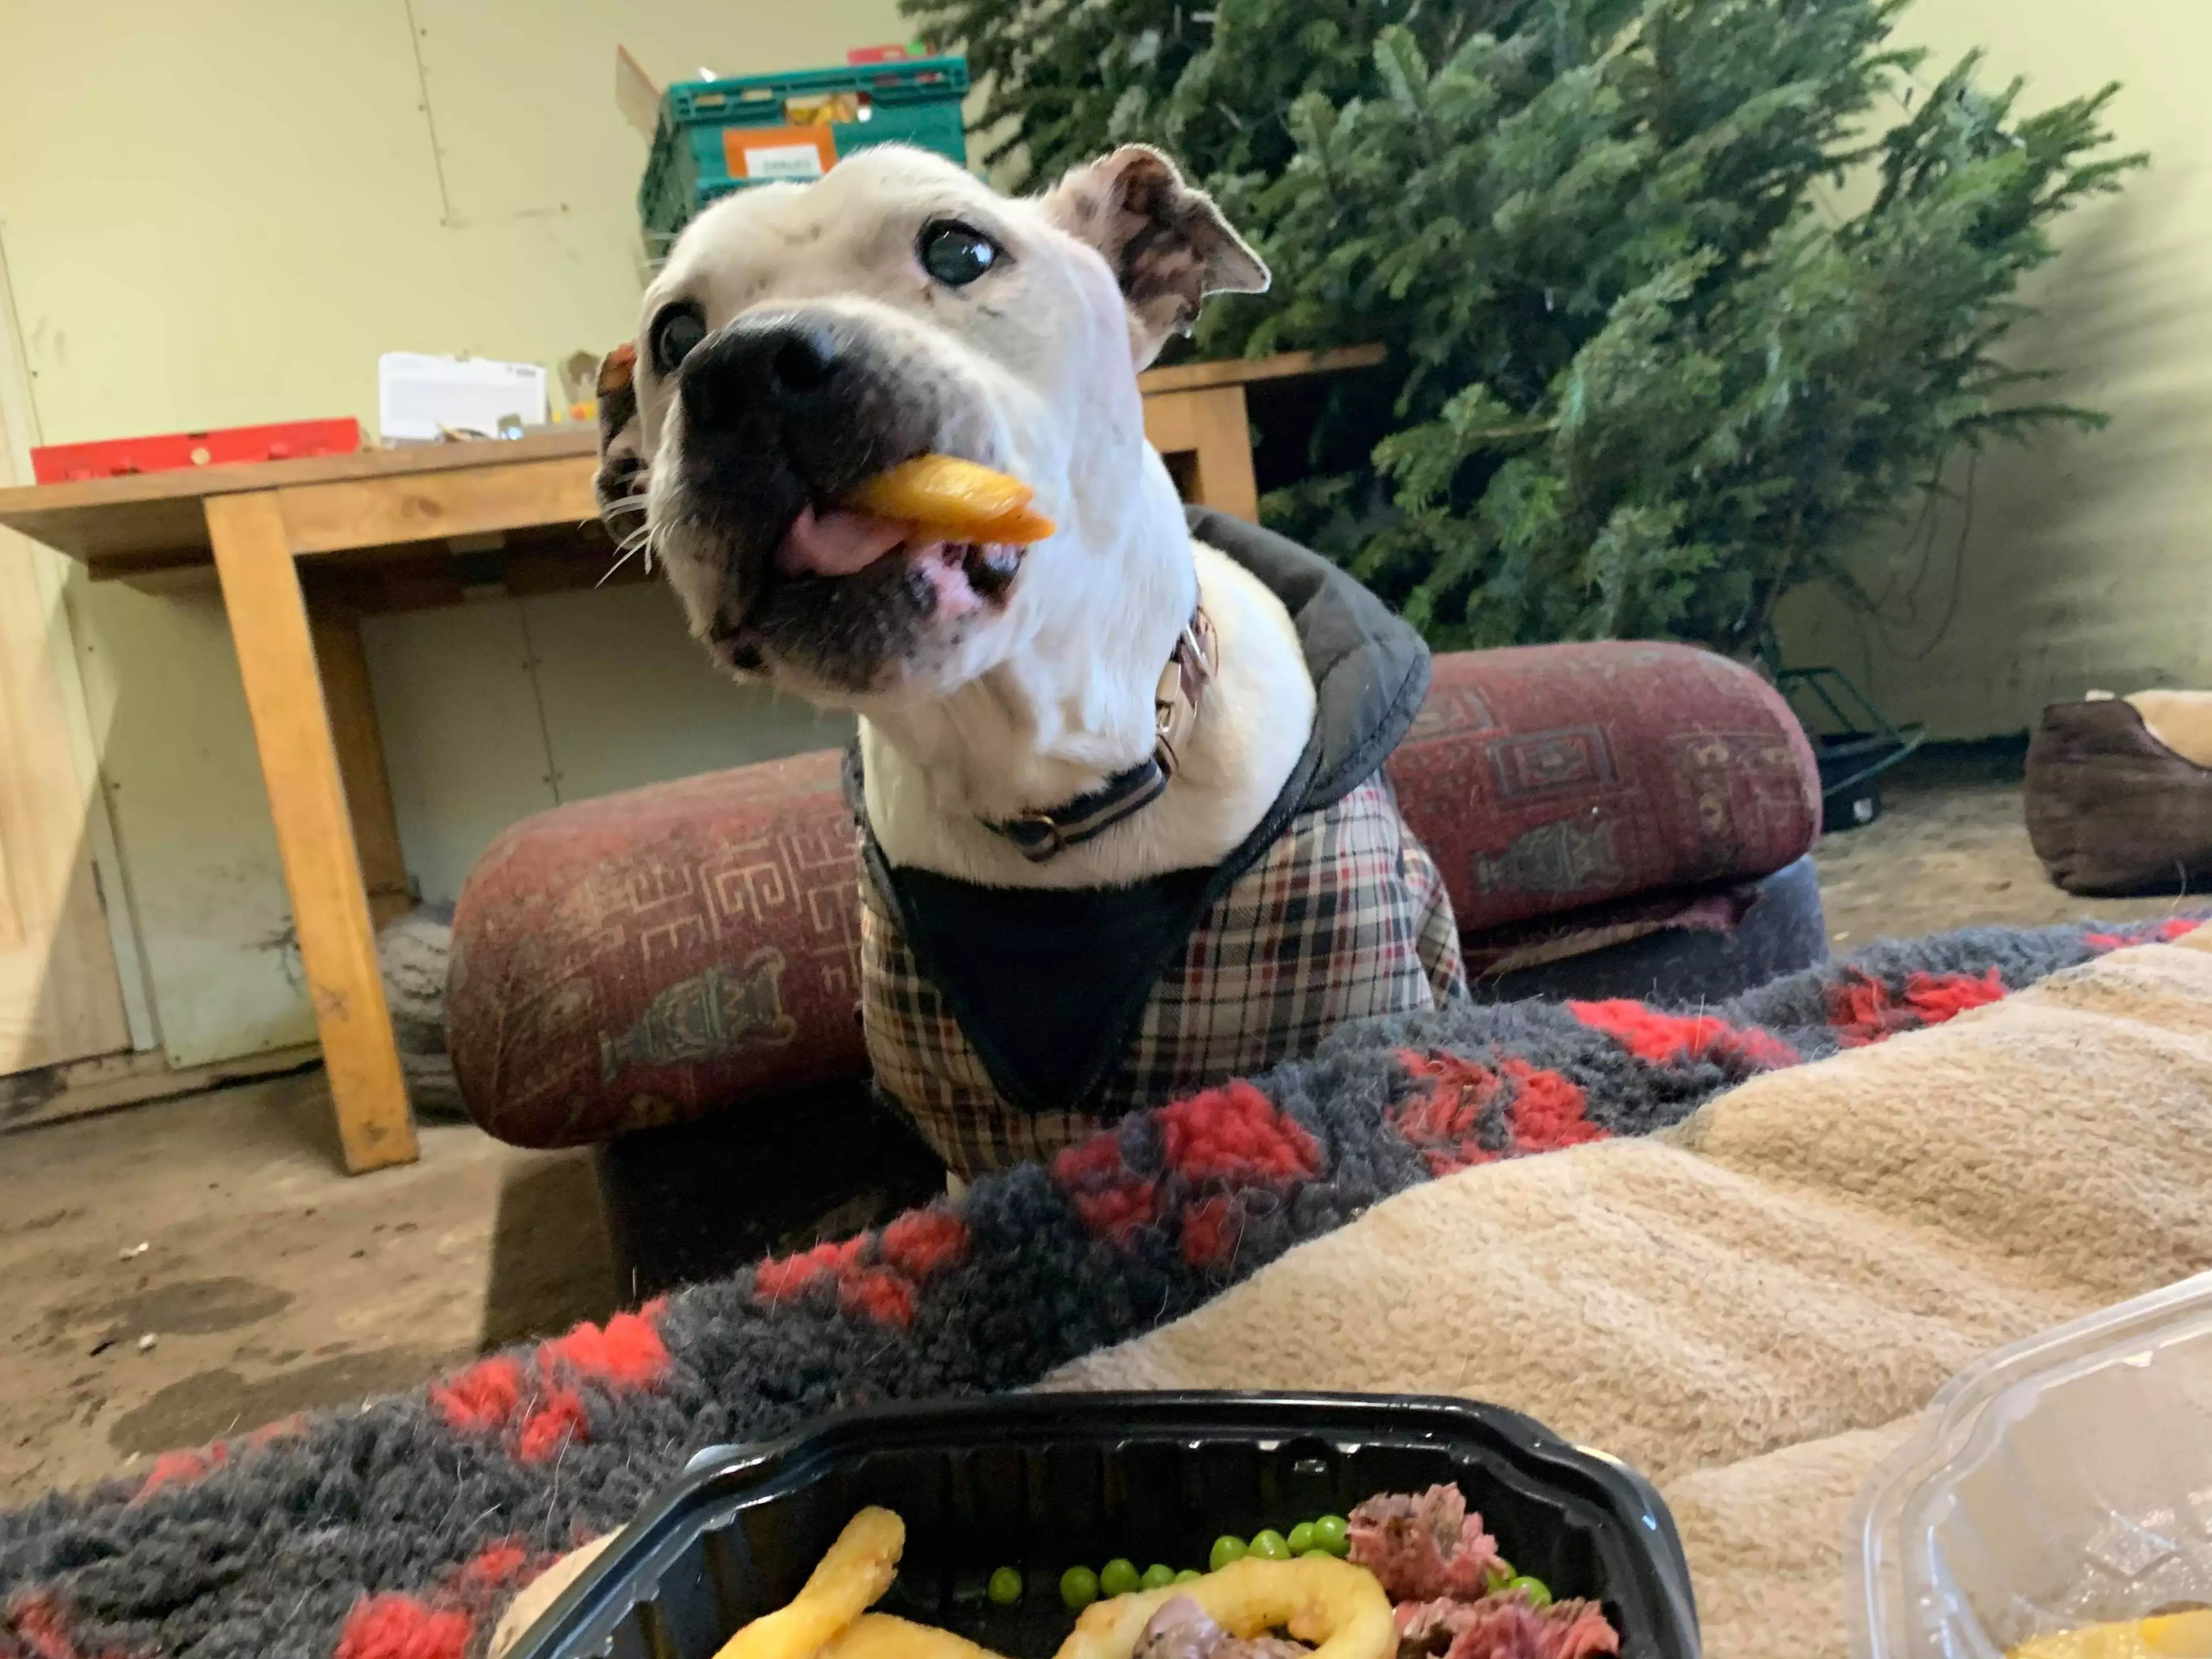 Staff at Dogs 4 Rescue even took him out for dinner (